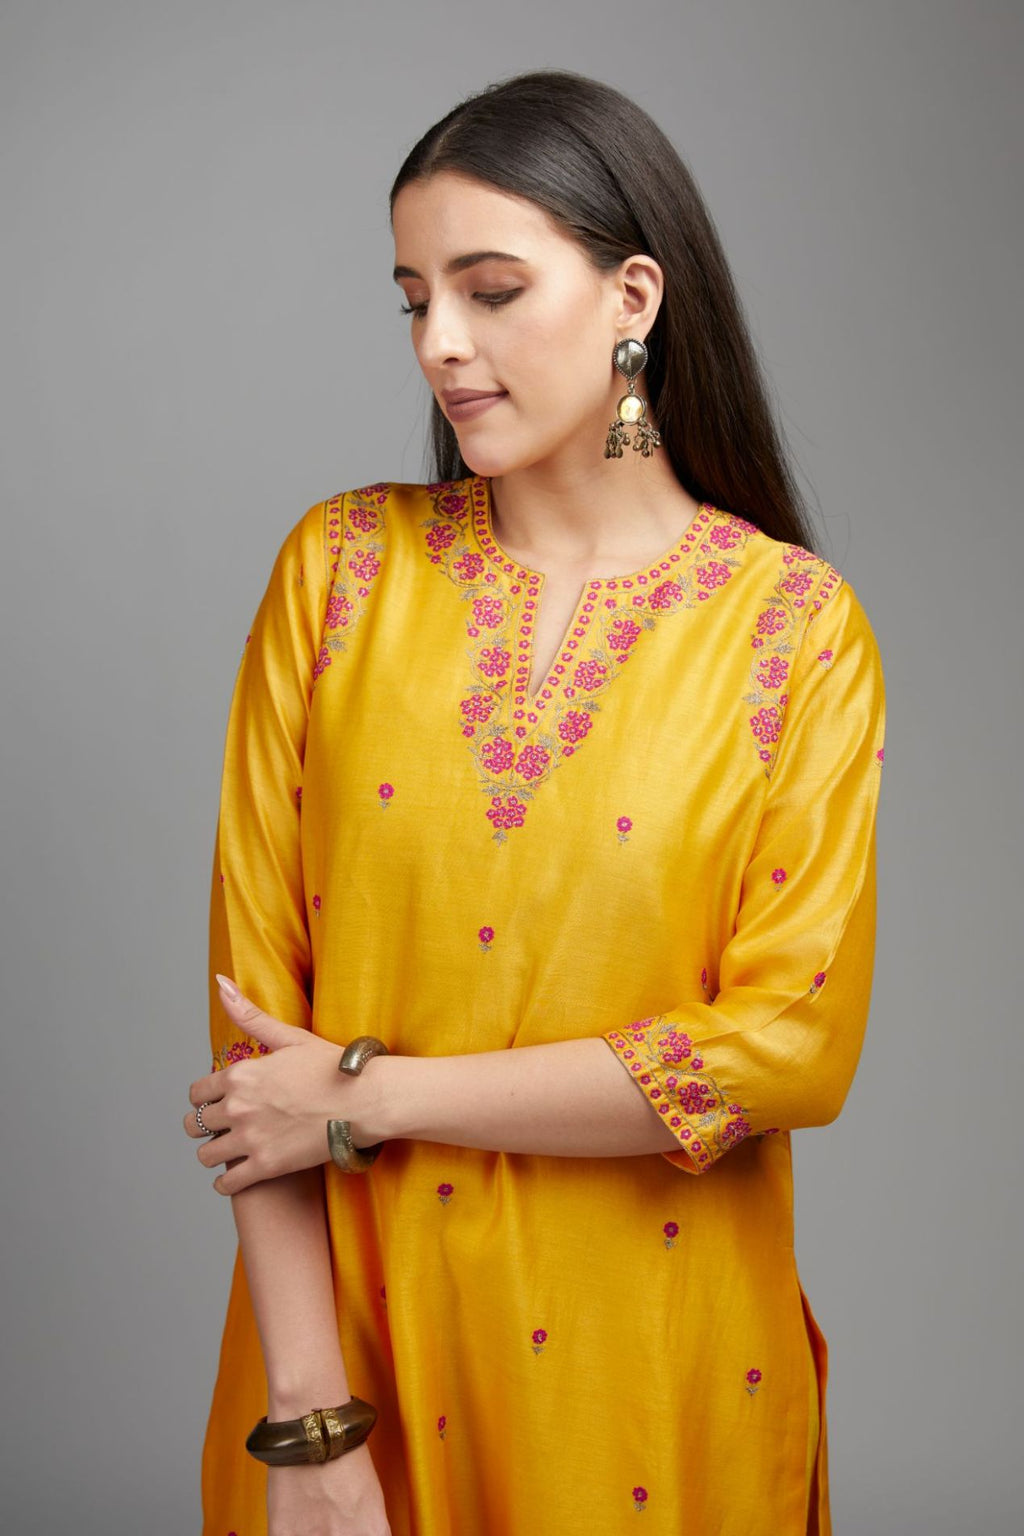 Mango yellow straight kurta set, highlighted with all-over delicate contrast coloured embroidery